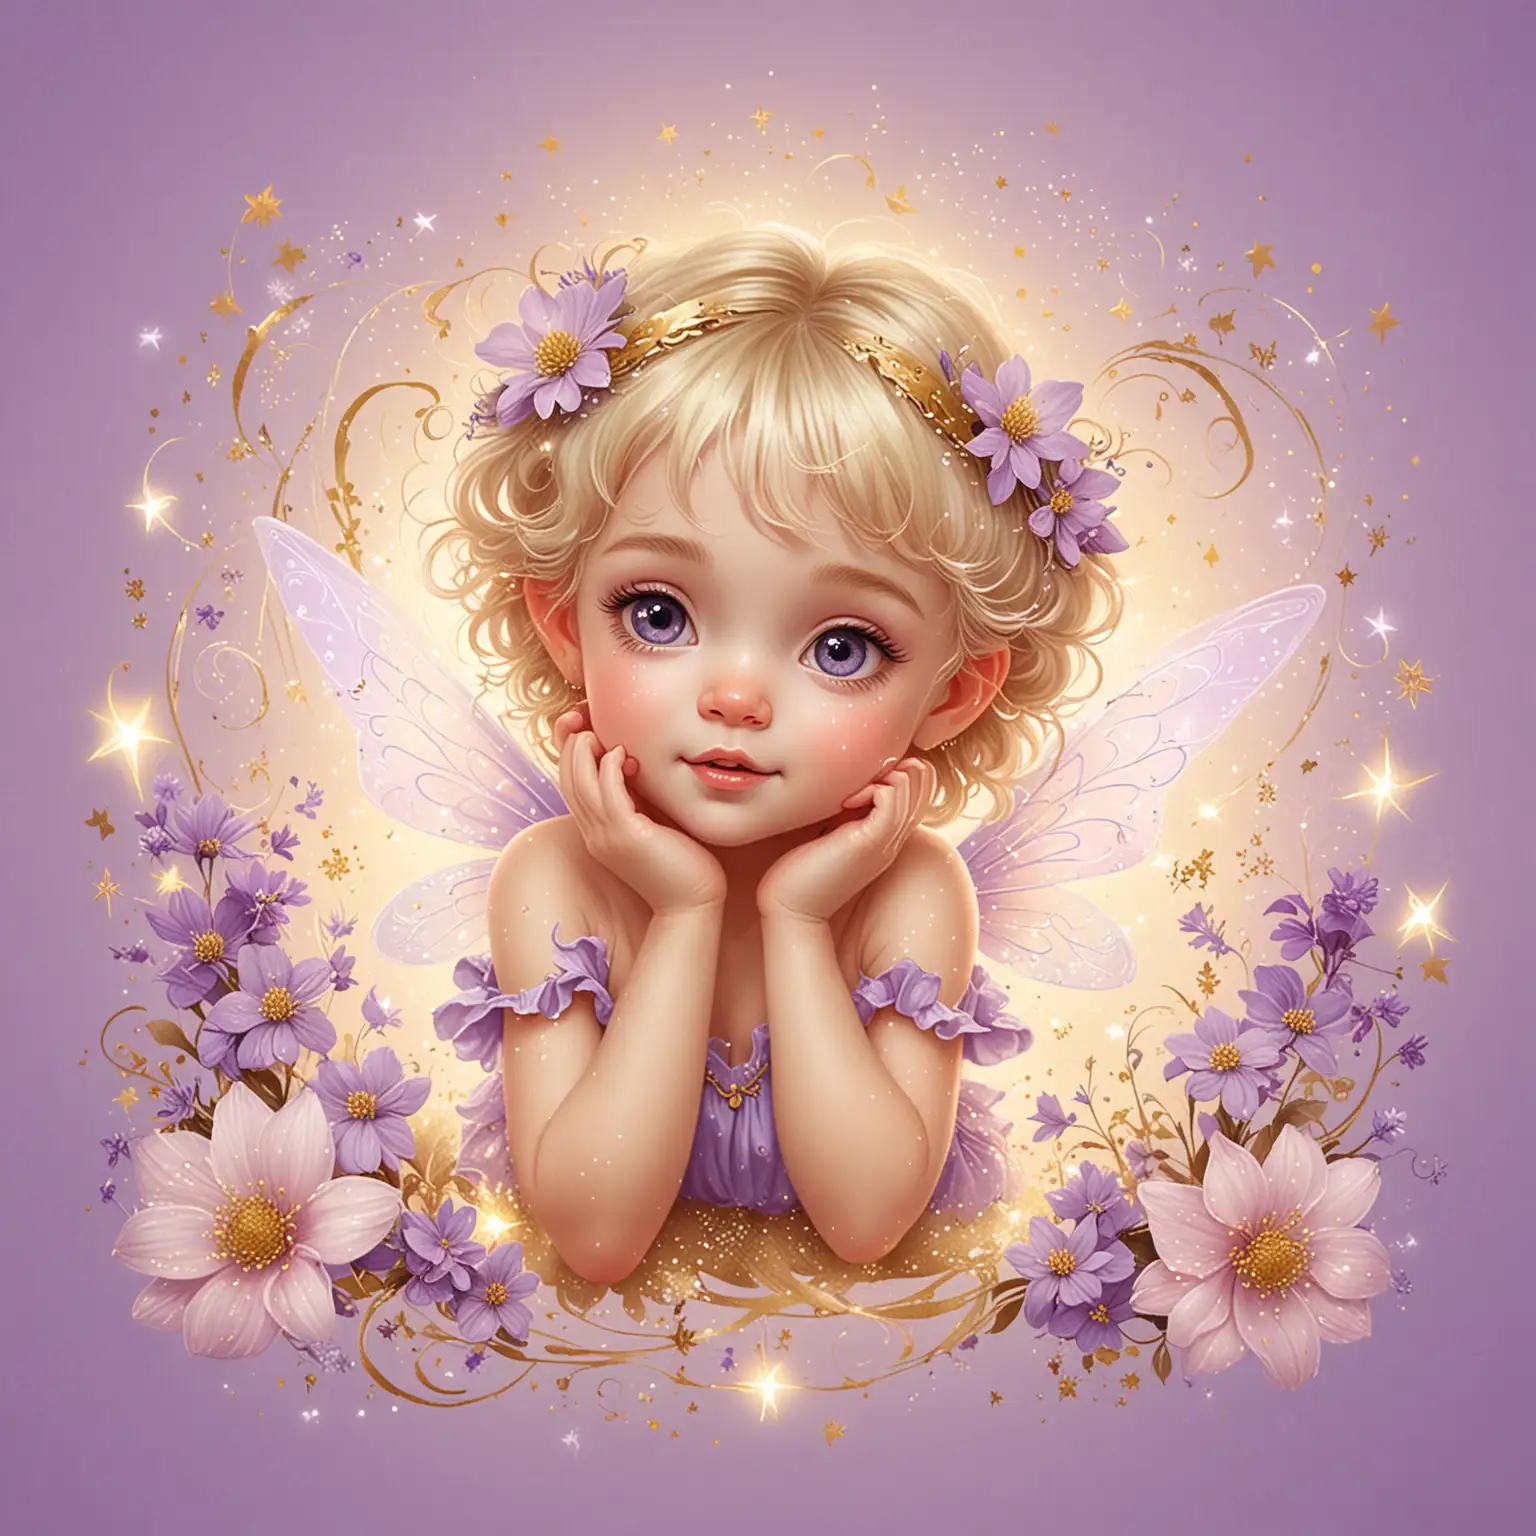 Enchanting LightHaired Baby Girl Fairy with Magic Swirls and Flowers on Pastel Purple Background